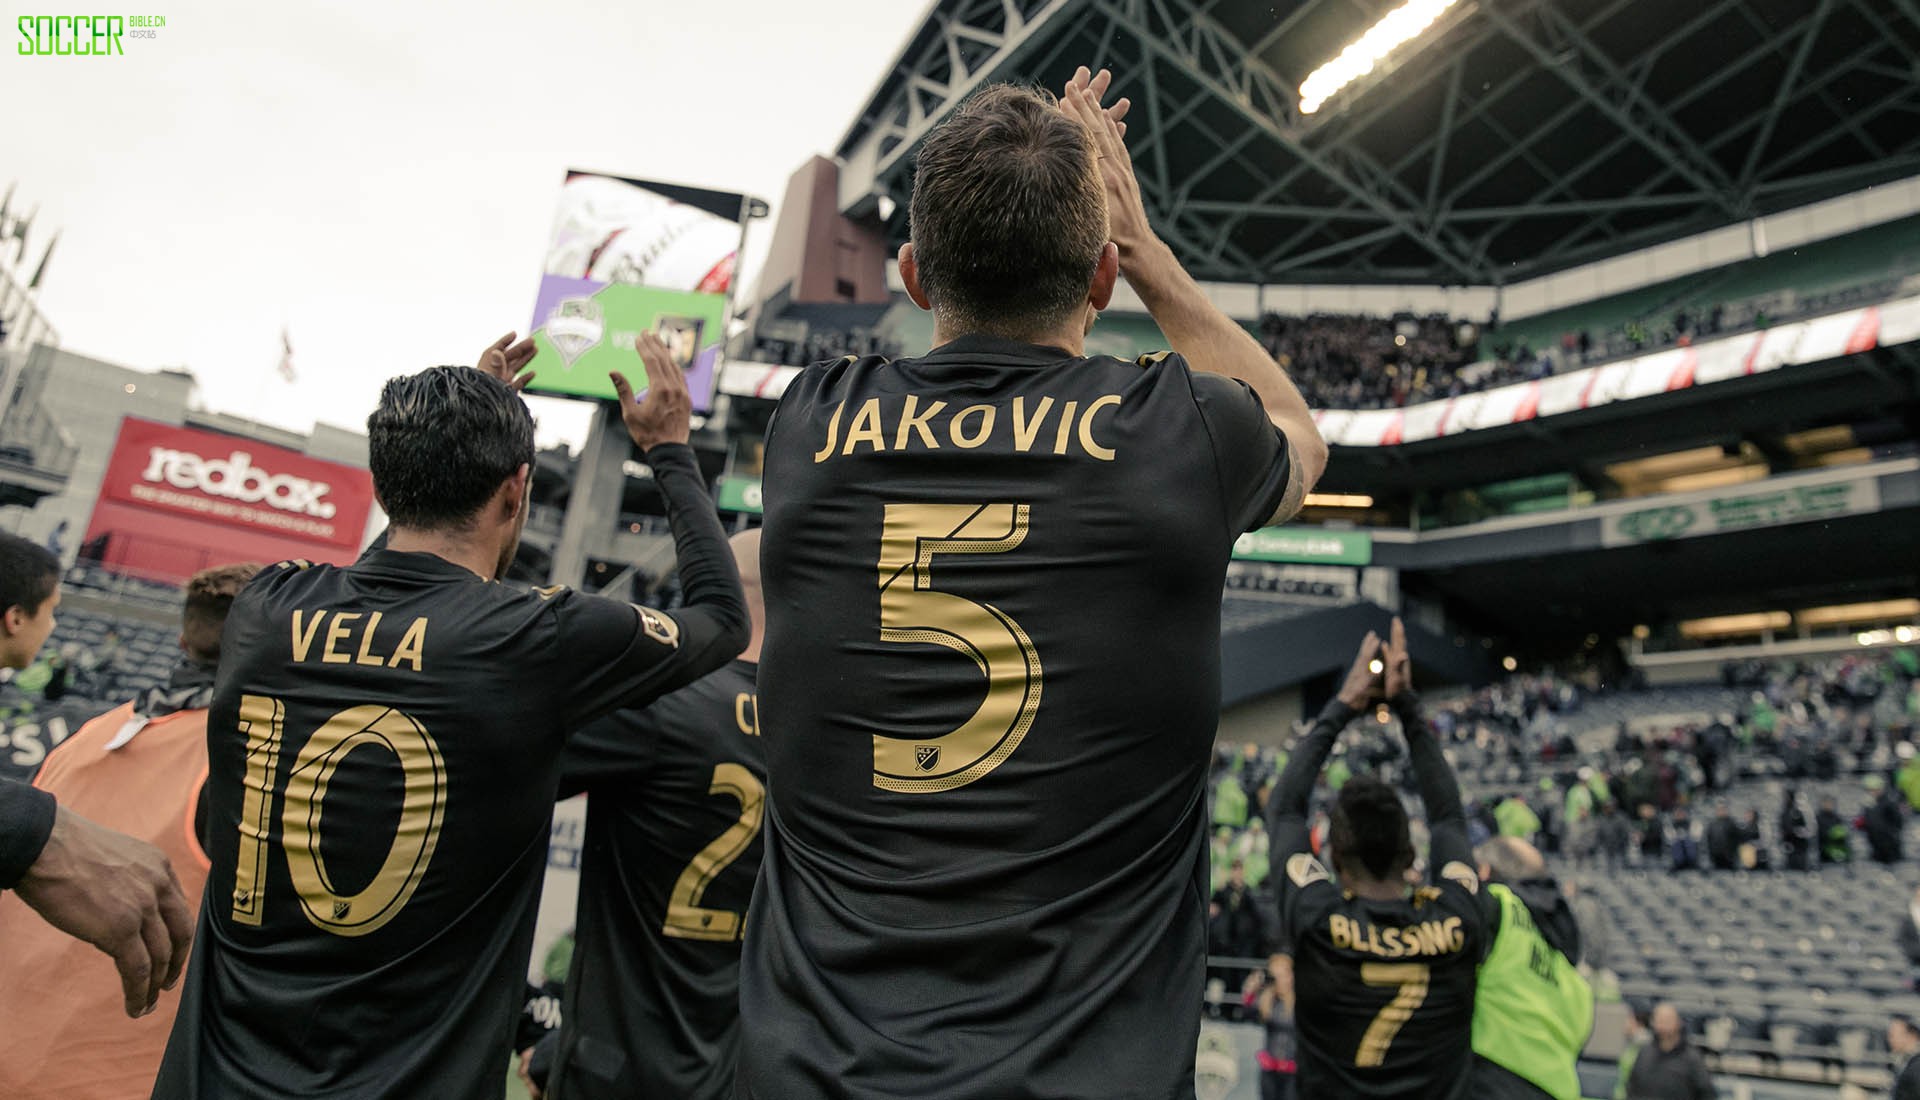 lafc-first-win-soccerbible_0009_2o7a9939